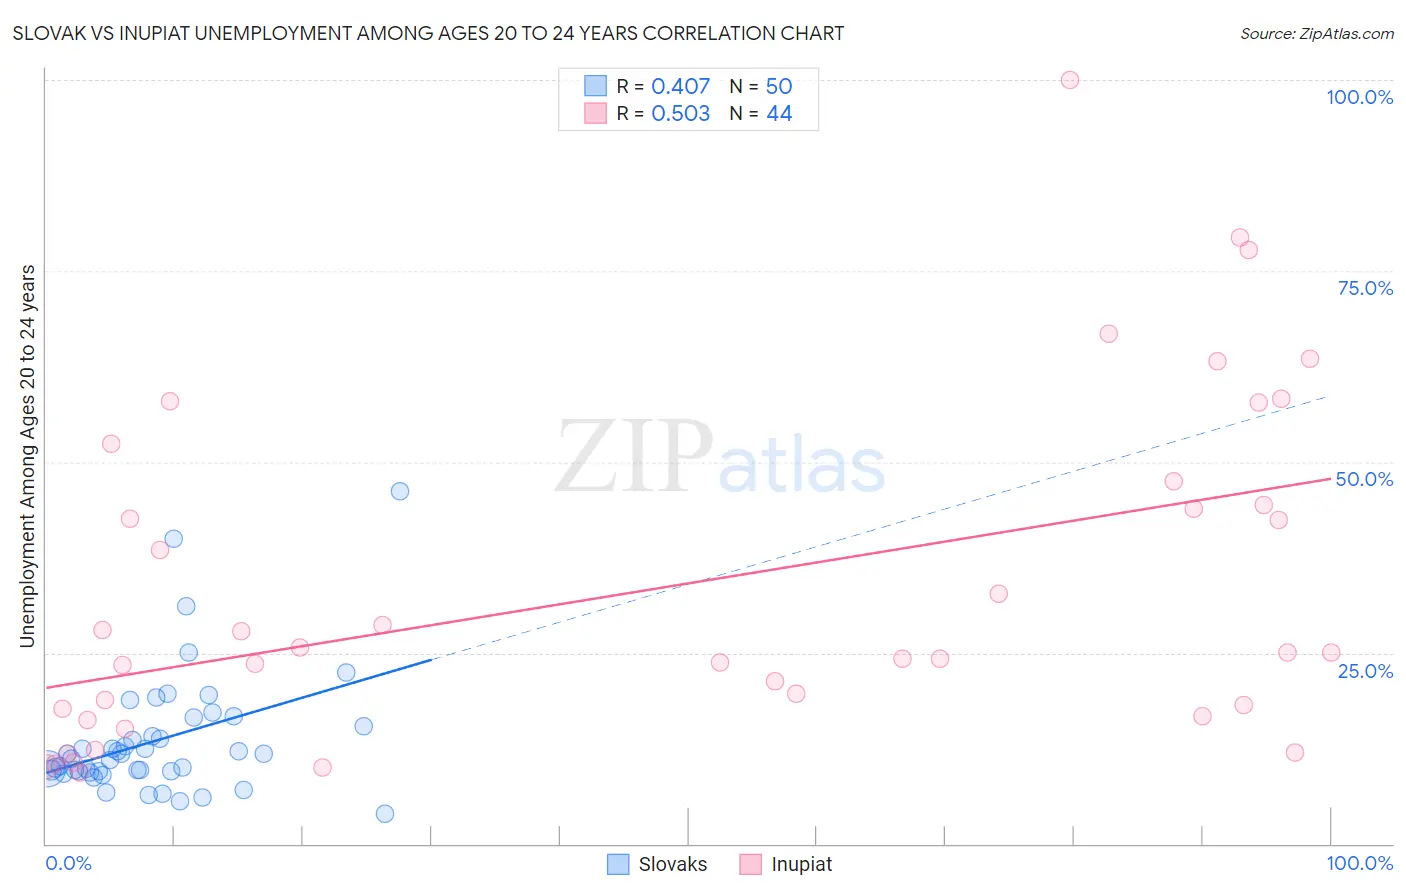 Slovak vs Inupiat Unemployment Among Ages 20 to 24 years